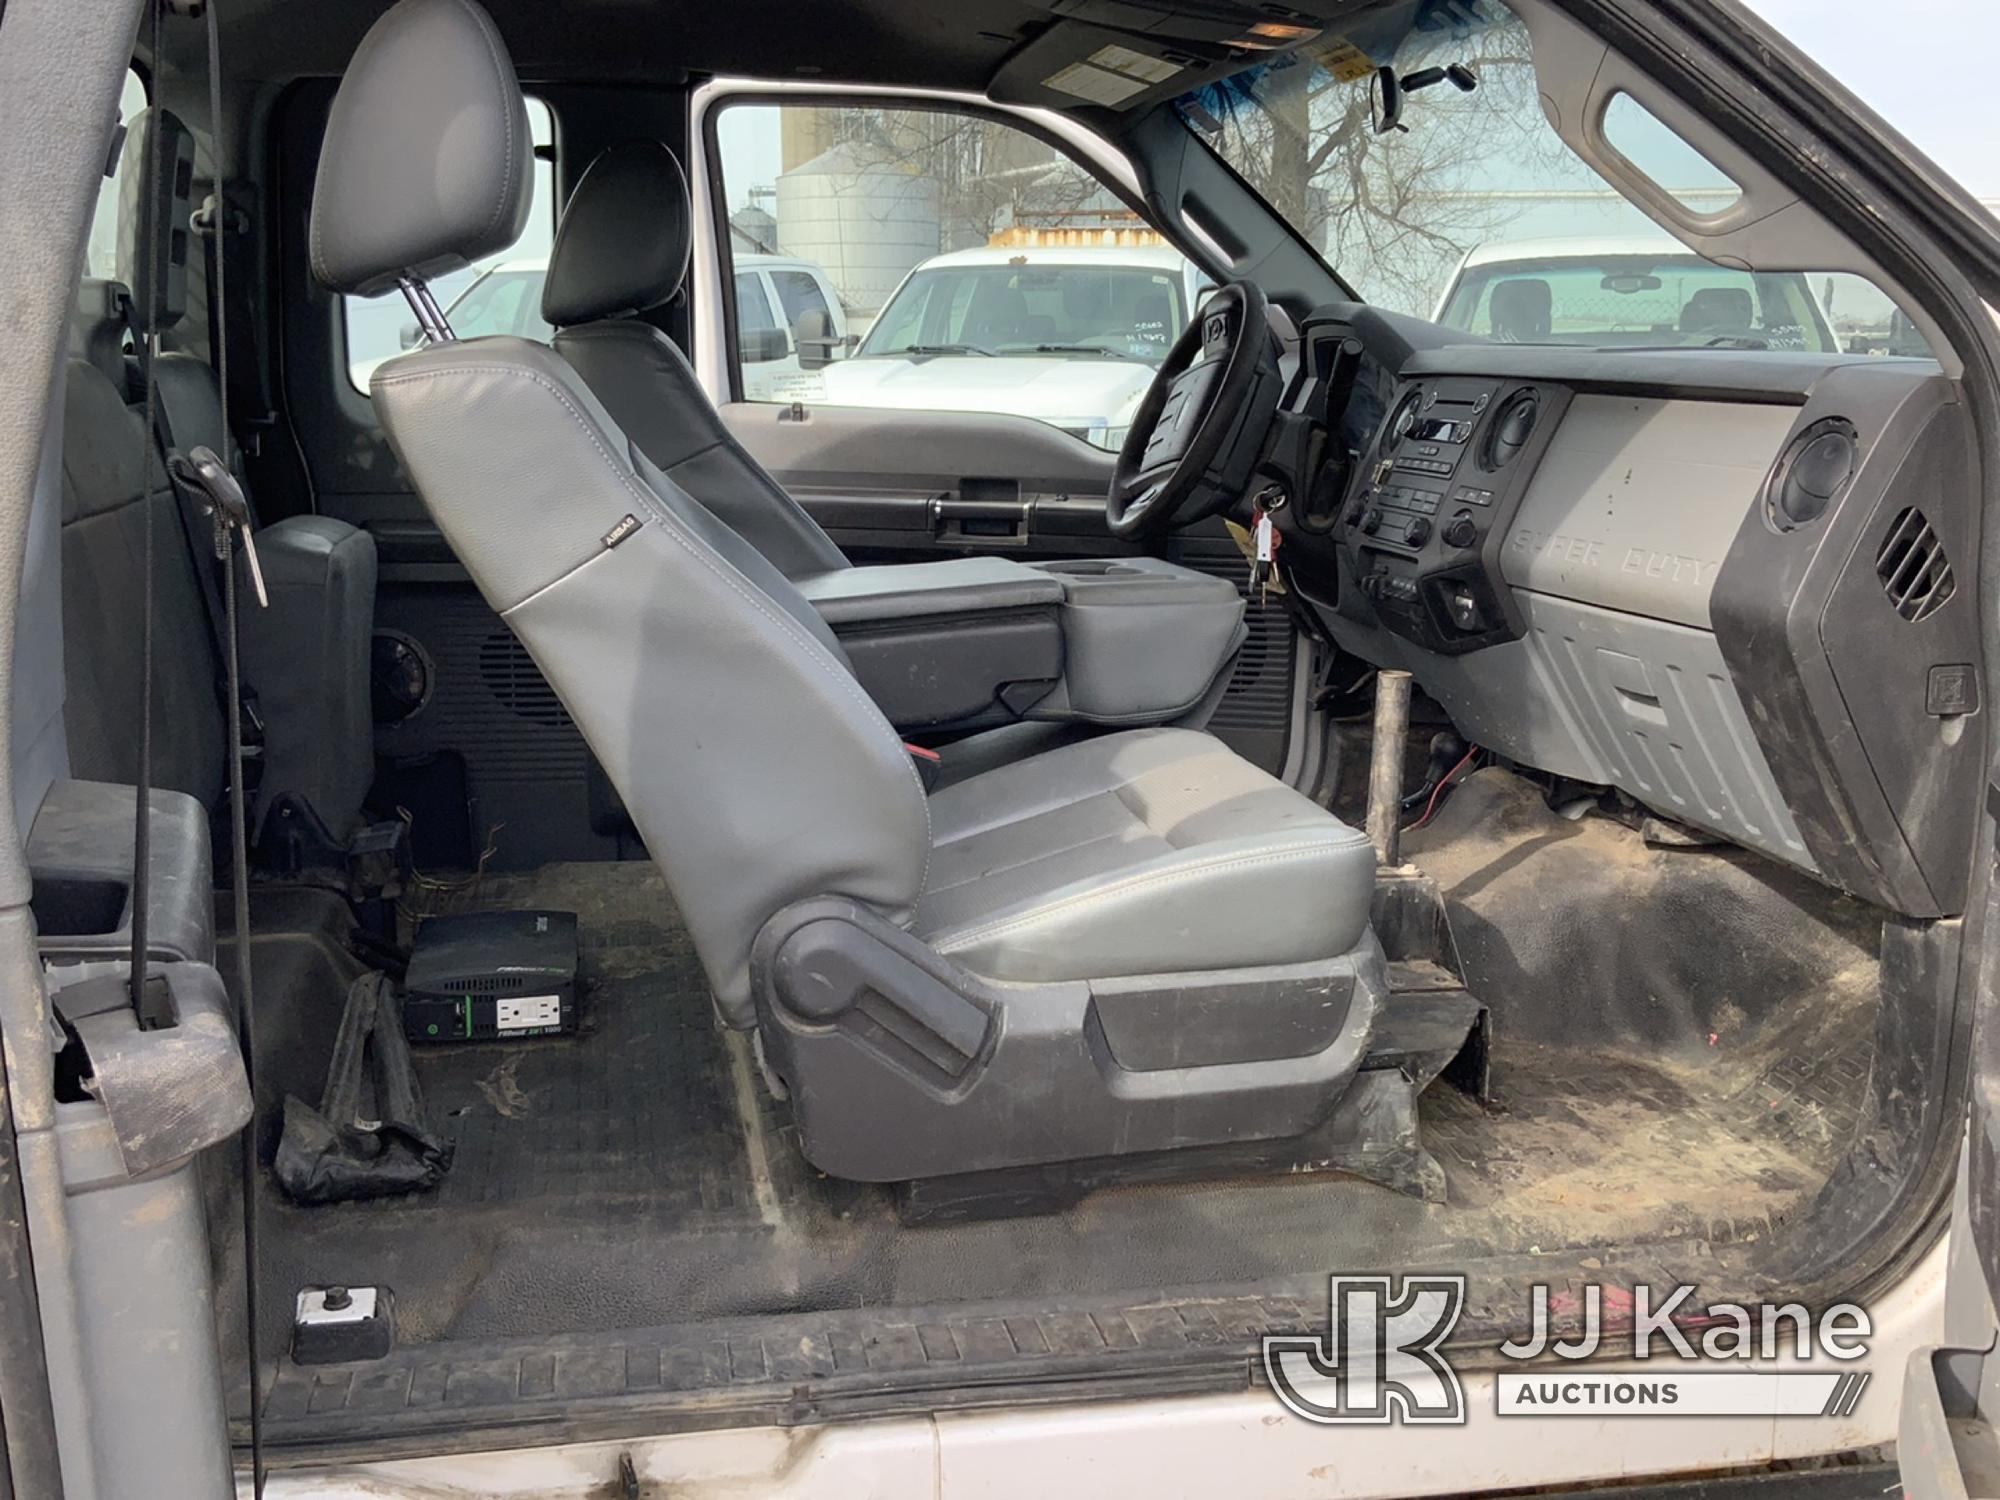 (South Beloit, IL) 2015 Ford F250 4x4 Extended-Cab Pickup Truck Runs & Moves) (Check Engine Light On